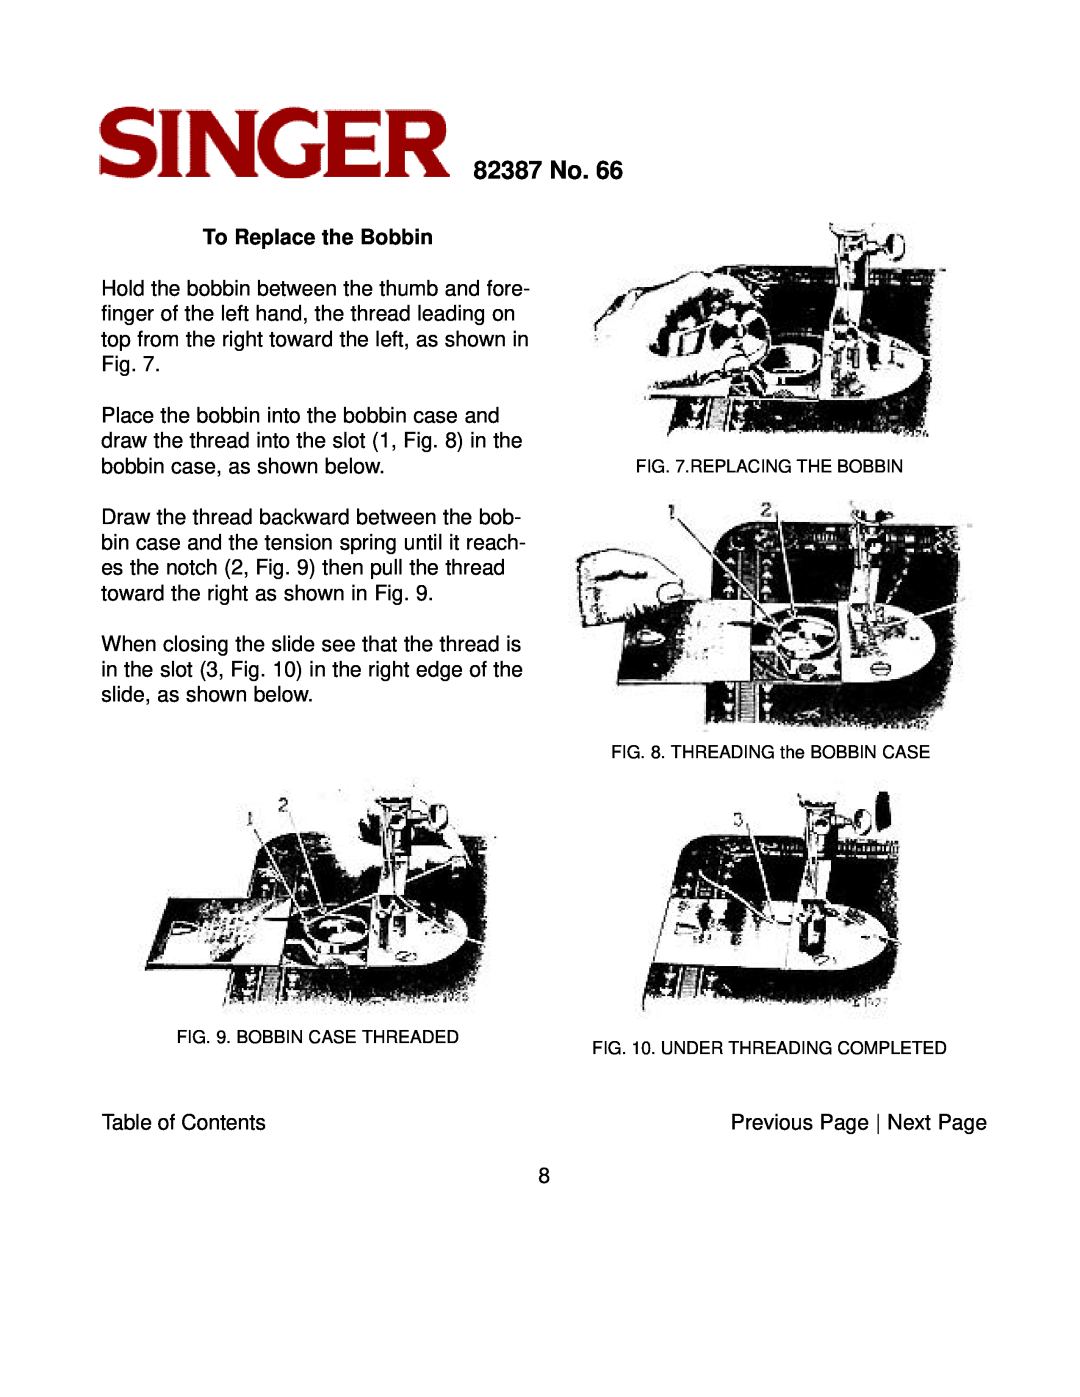 Singer instruction manual To Replace the Bobbin, 82387 No, REPLACING THE BOBBIN . THREADING the BOBBIN CASE 